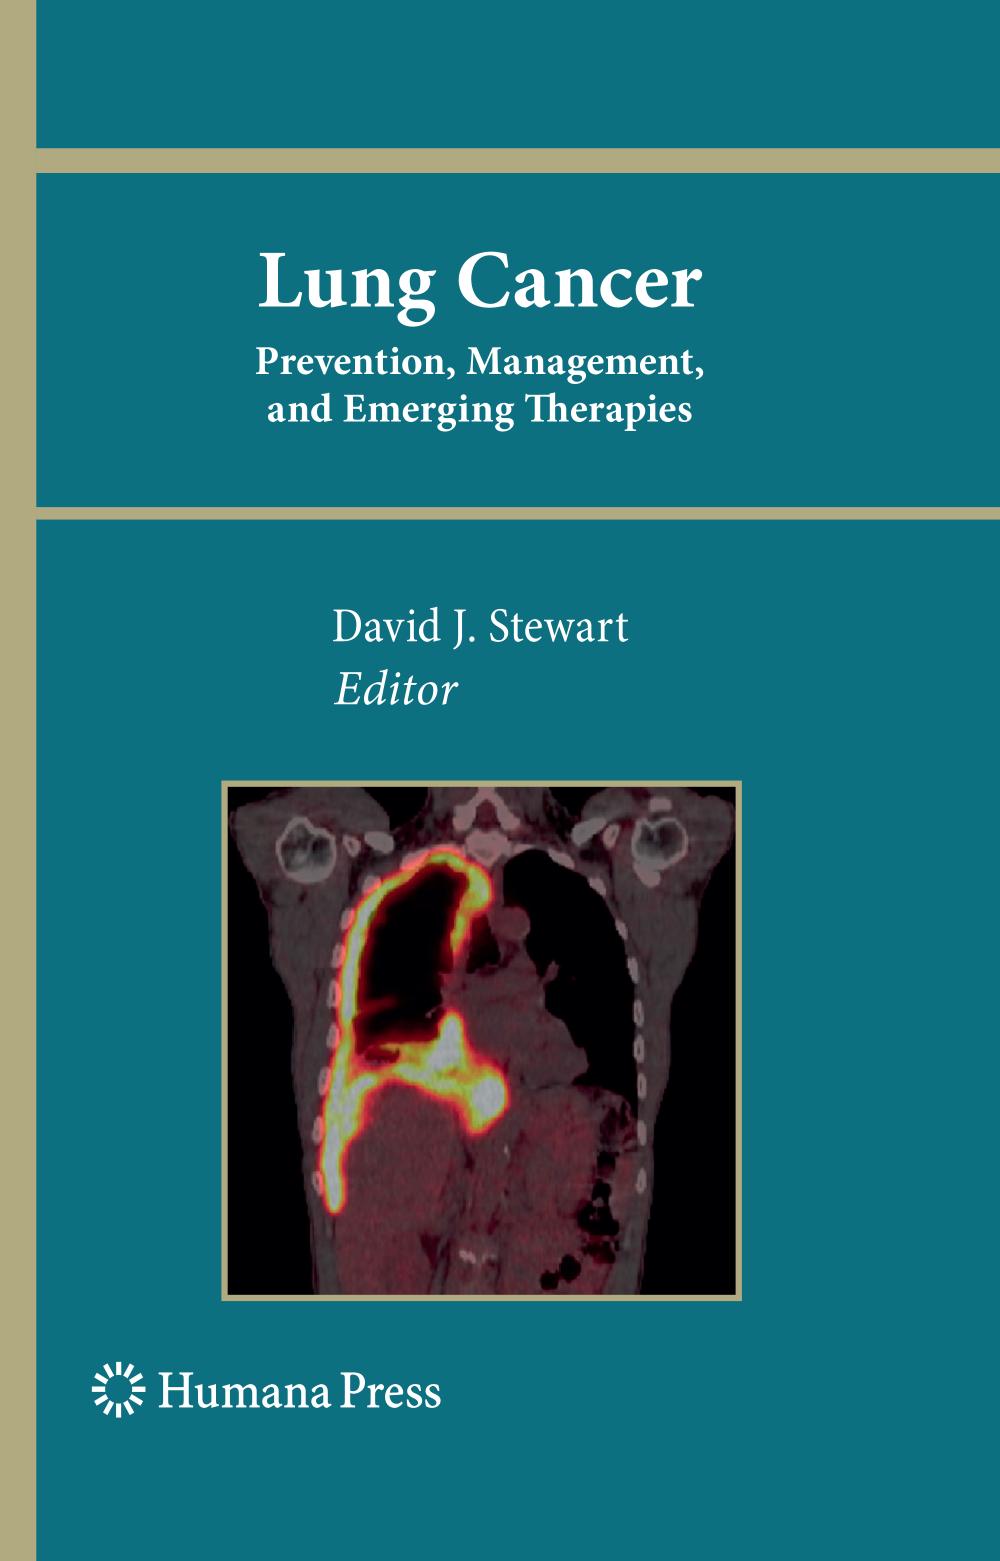 Lung Cancer Prevention, Management, and Emerging Therapies